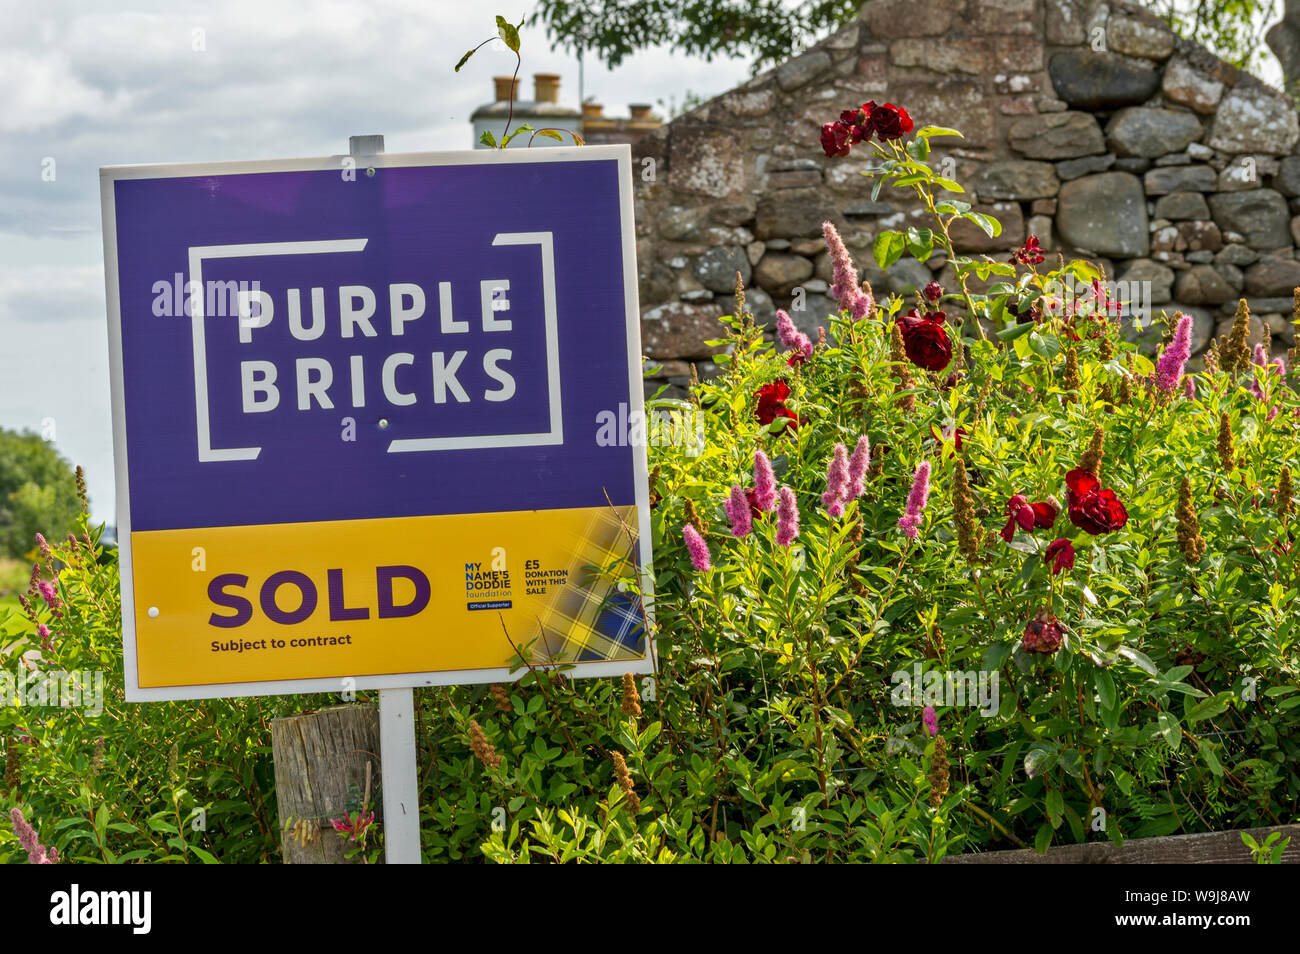 PURPLE BRICKS REAL ESTATE SOLD SIGN AMONGST FLOWERS IN A GARDEN Stock Photo